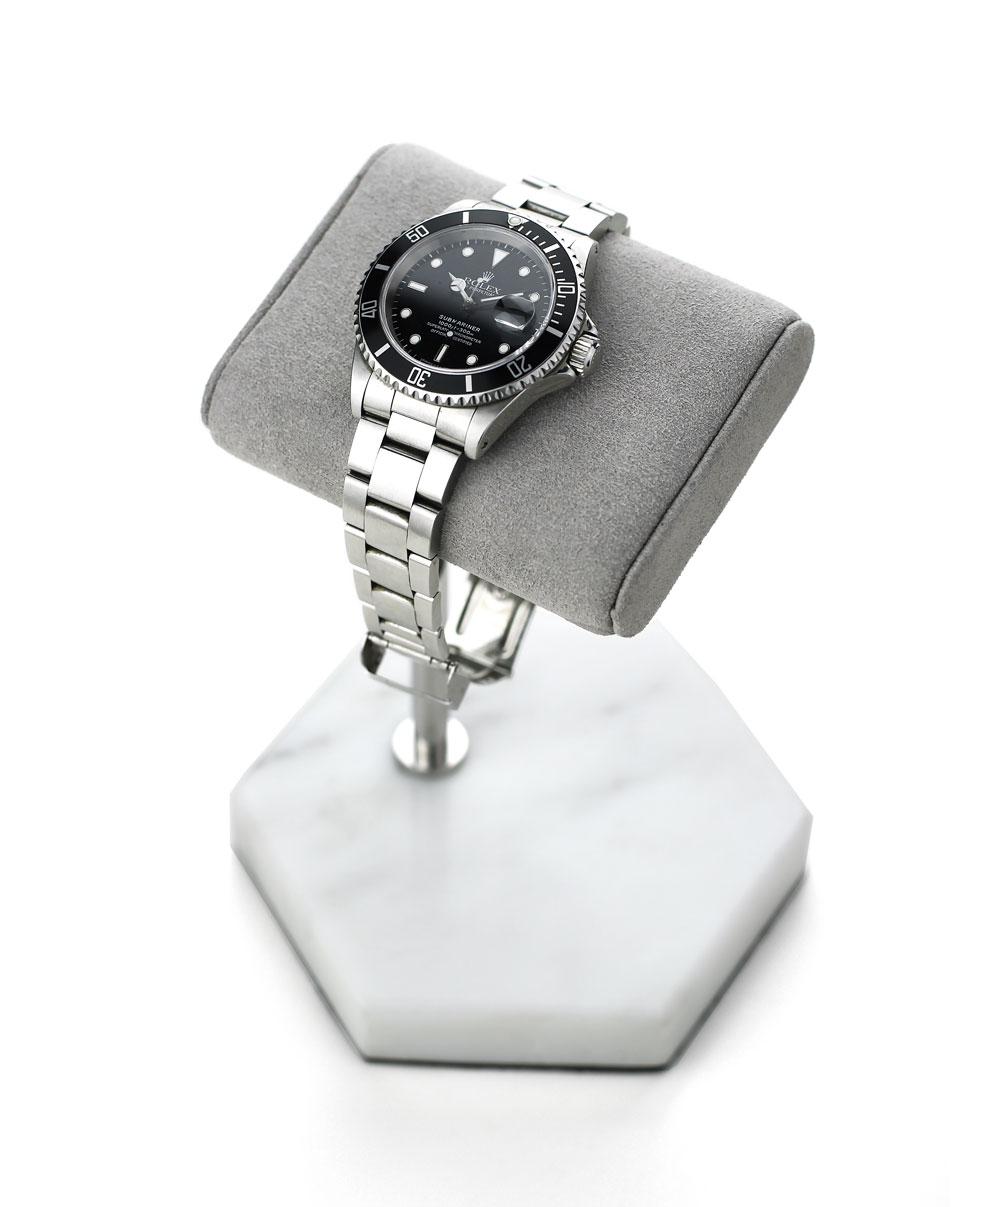 Watch Stand Marble white marble & soft cushion in